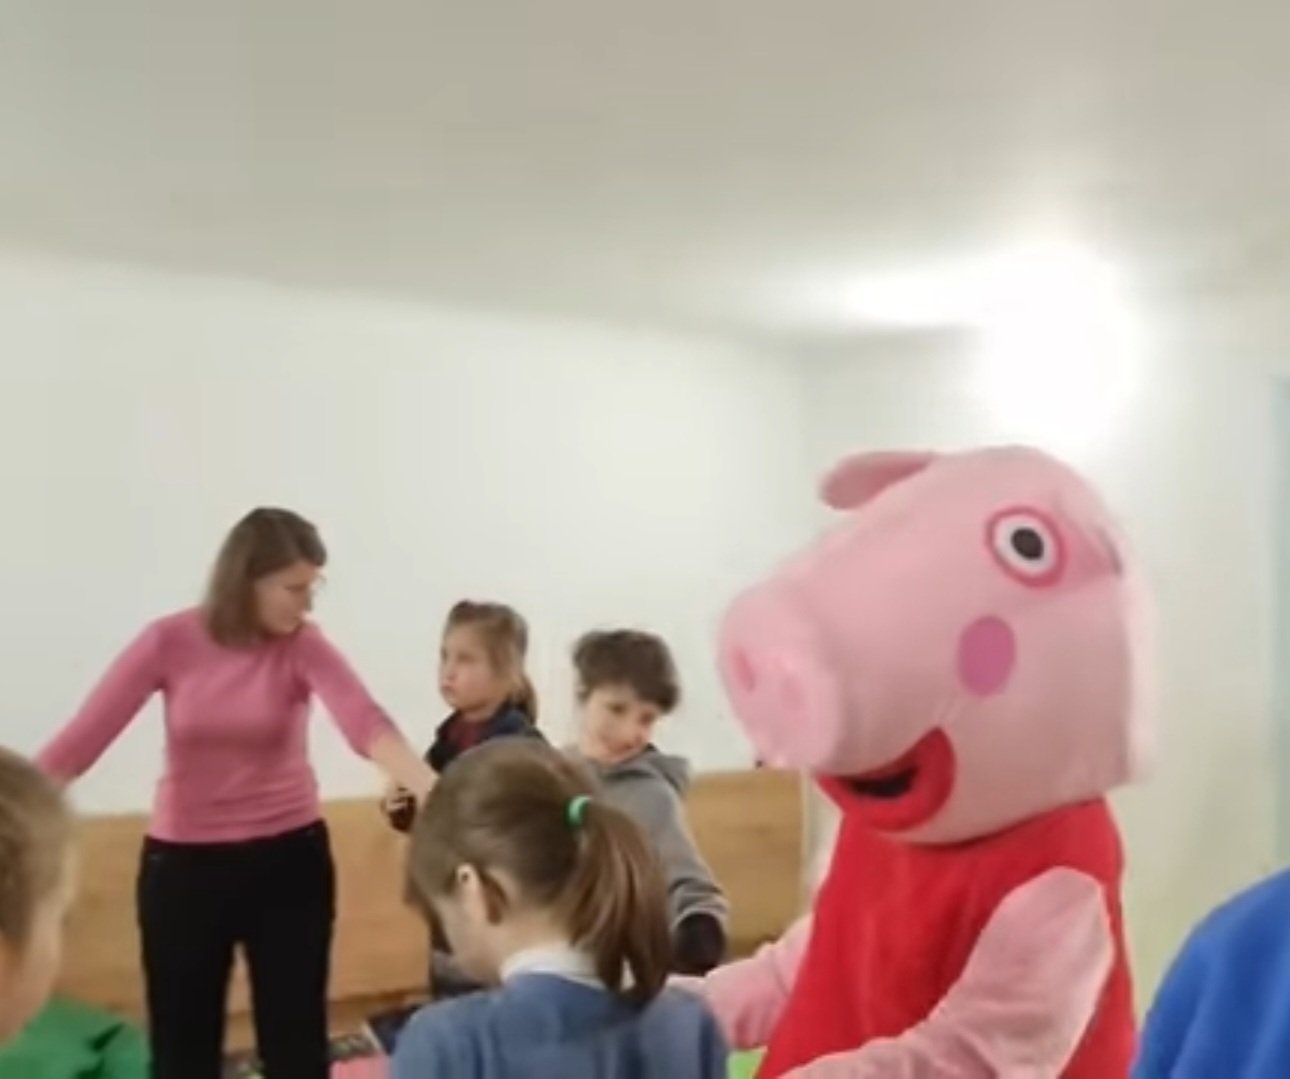 Woman dressed as Peppa Pig in a room with children